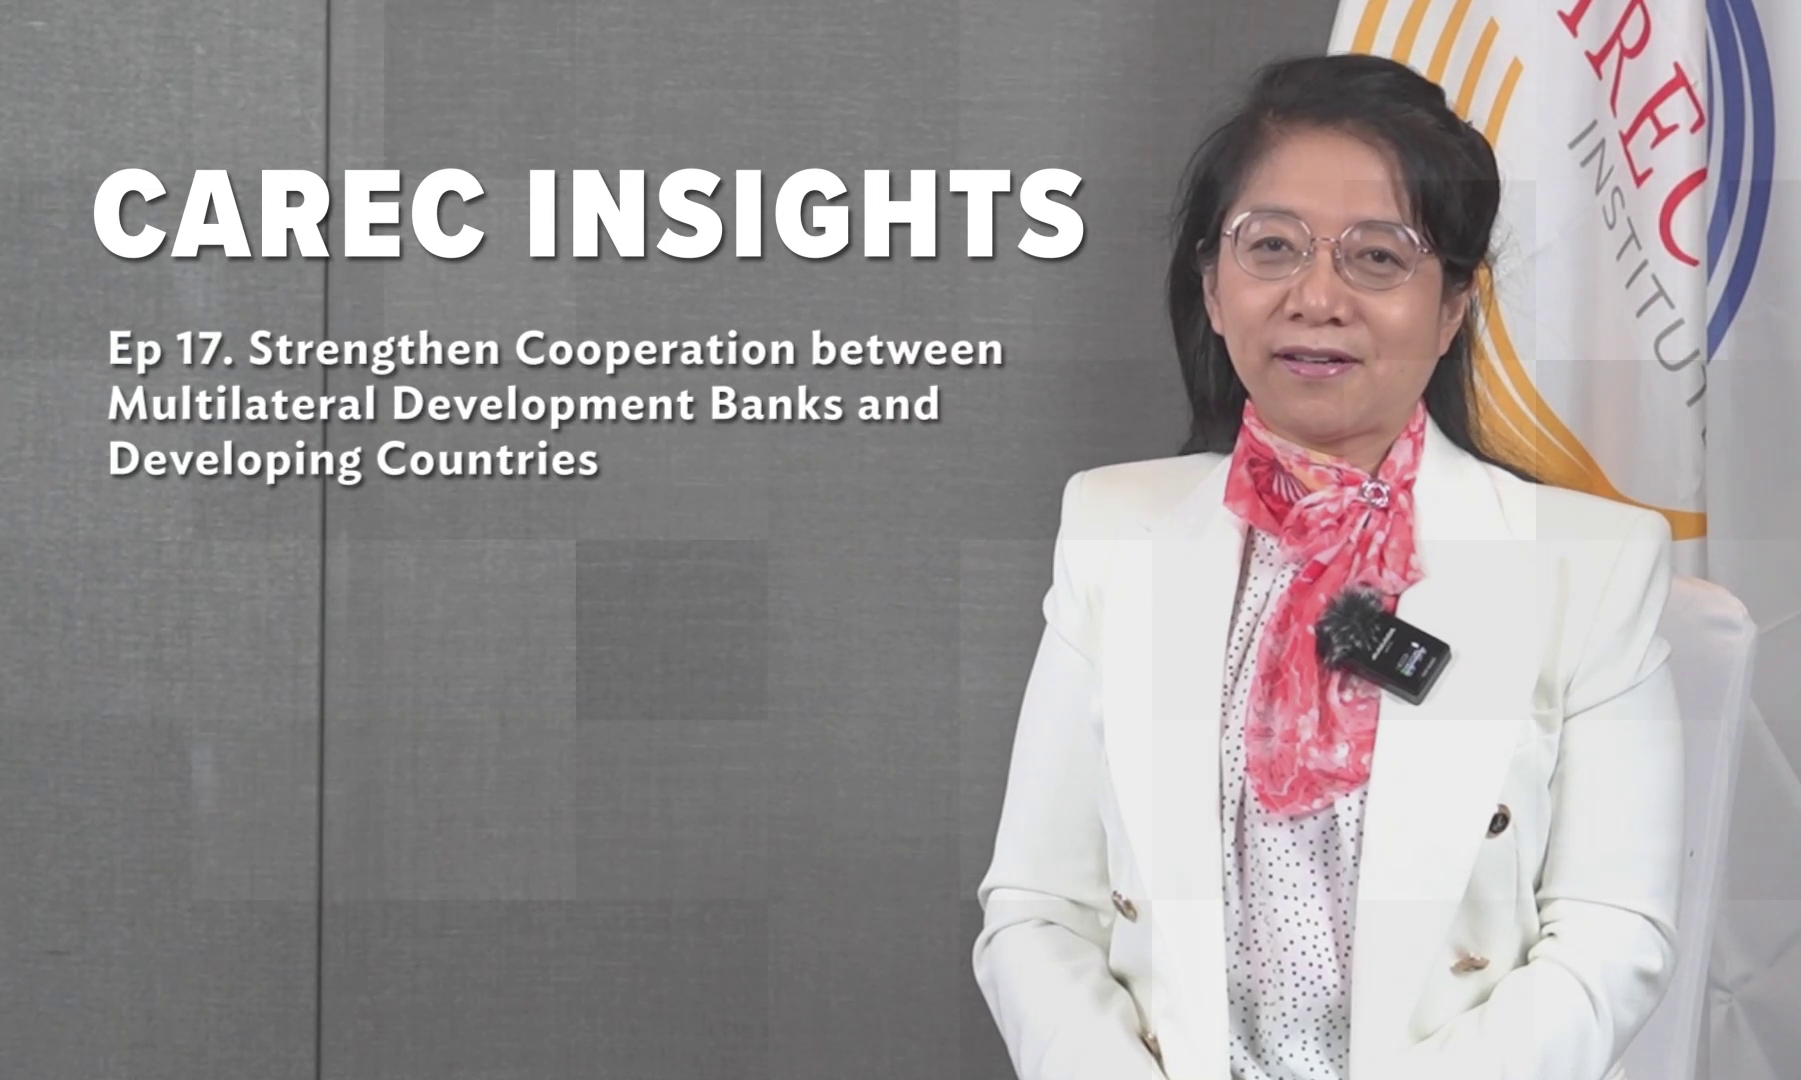 Ep 17. Strengthen Cooperation between Multilateral Development Banks and Developing Countries